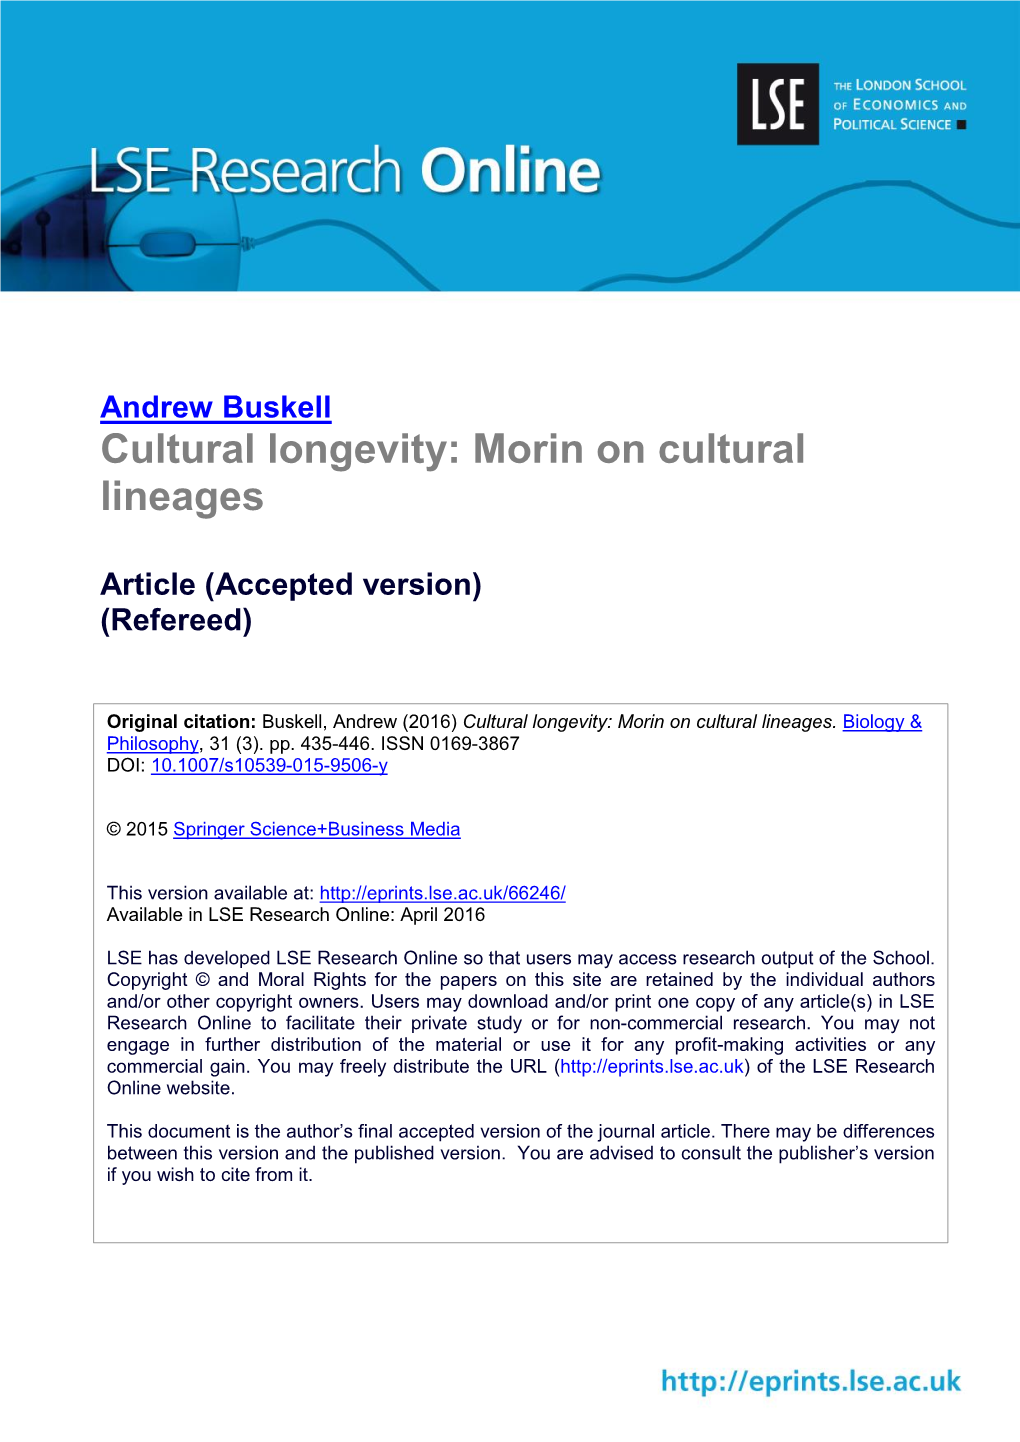 Cultural Longevity: Morin on Cultural Lineages